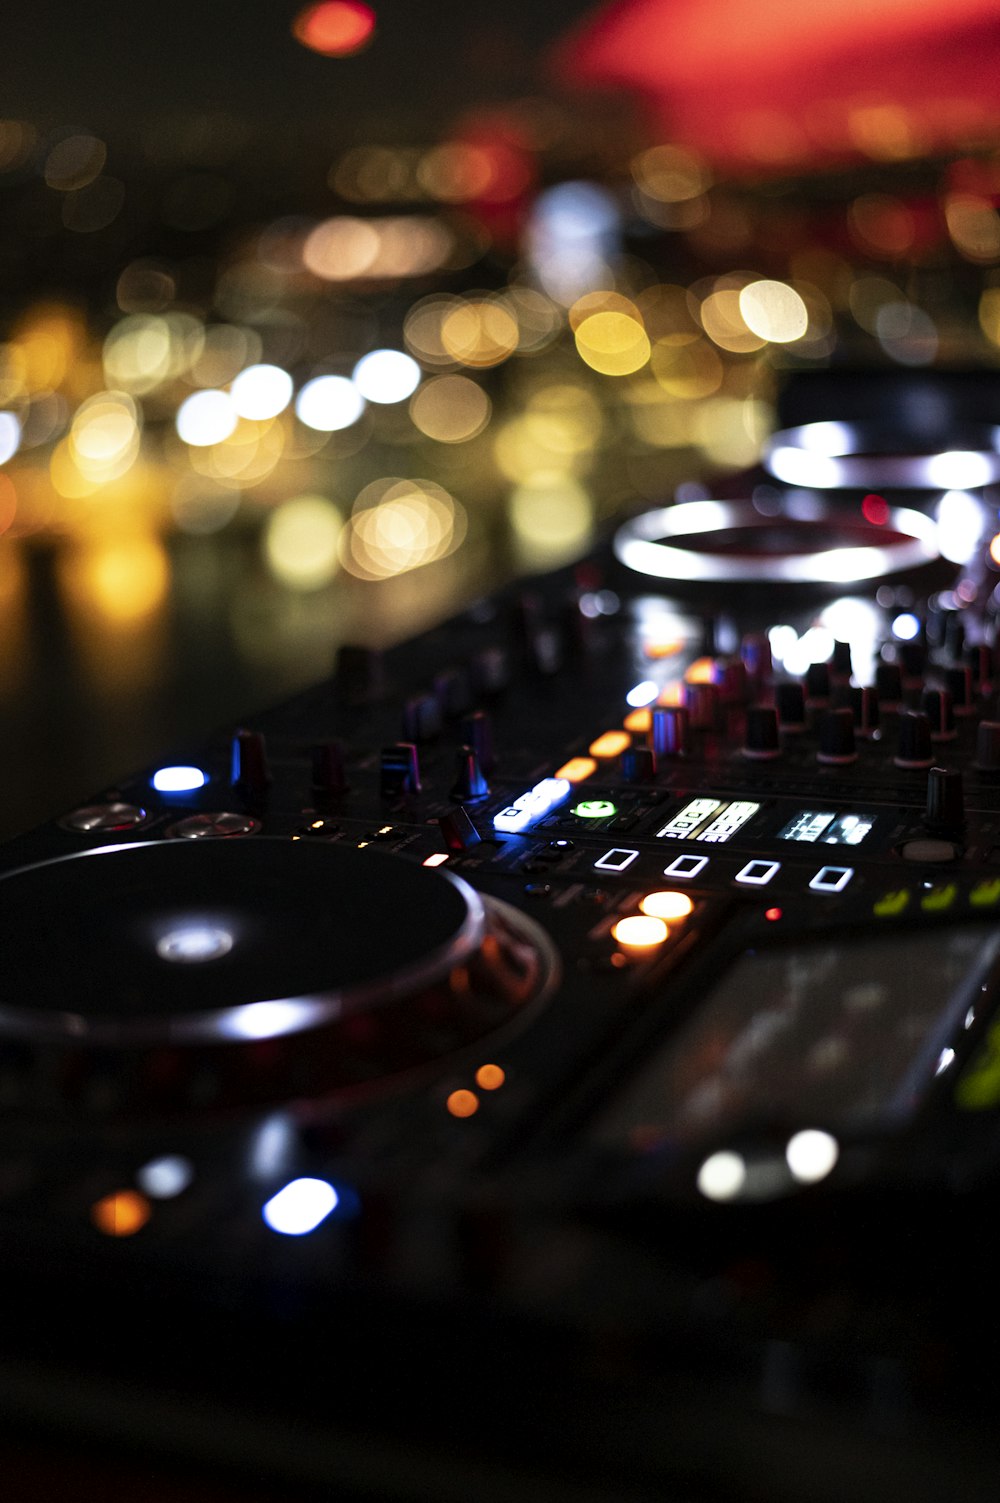 a close up of a dj controller with blurry lights in the background